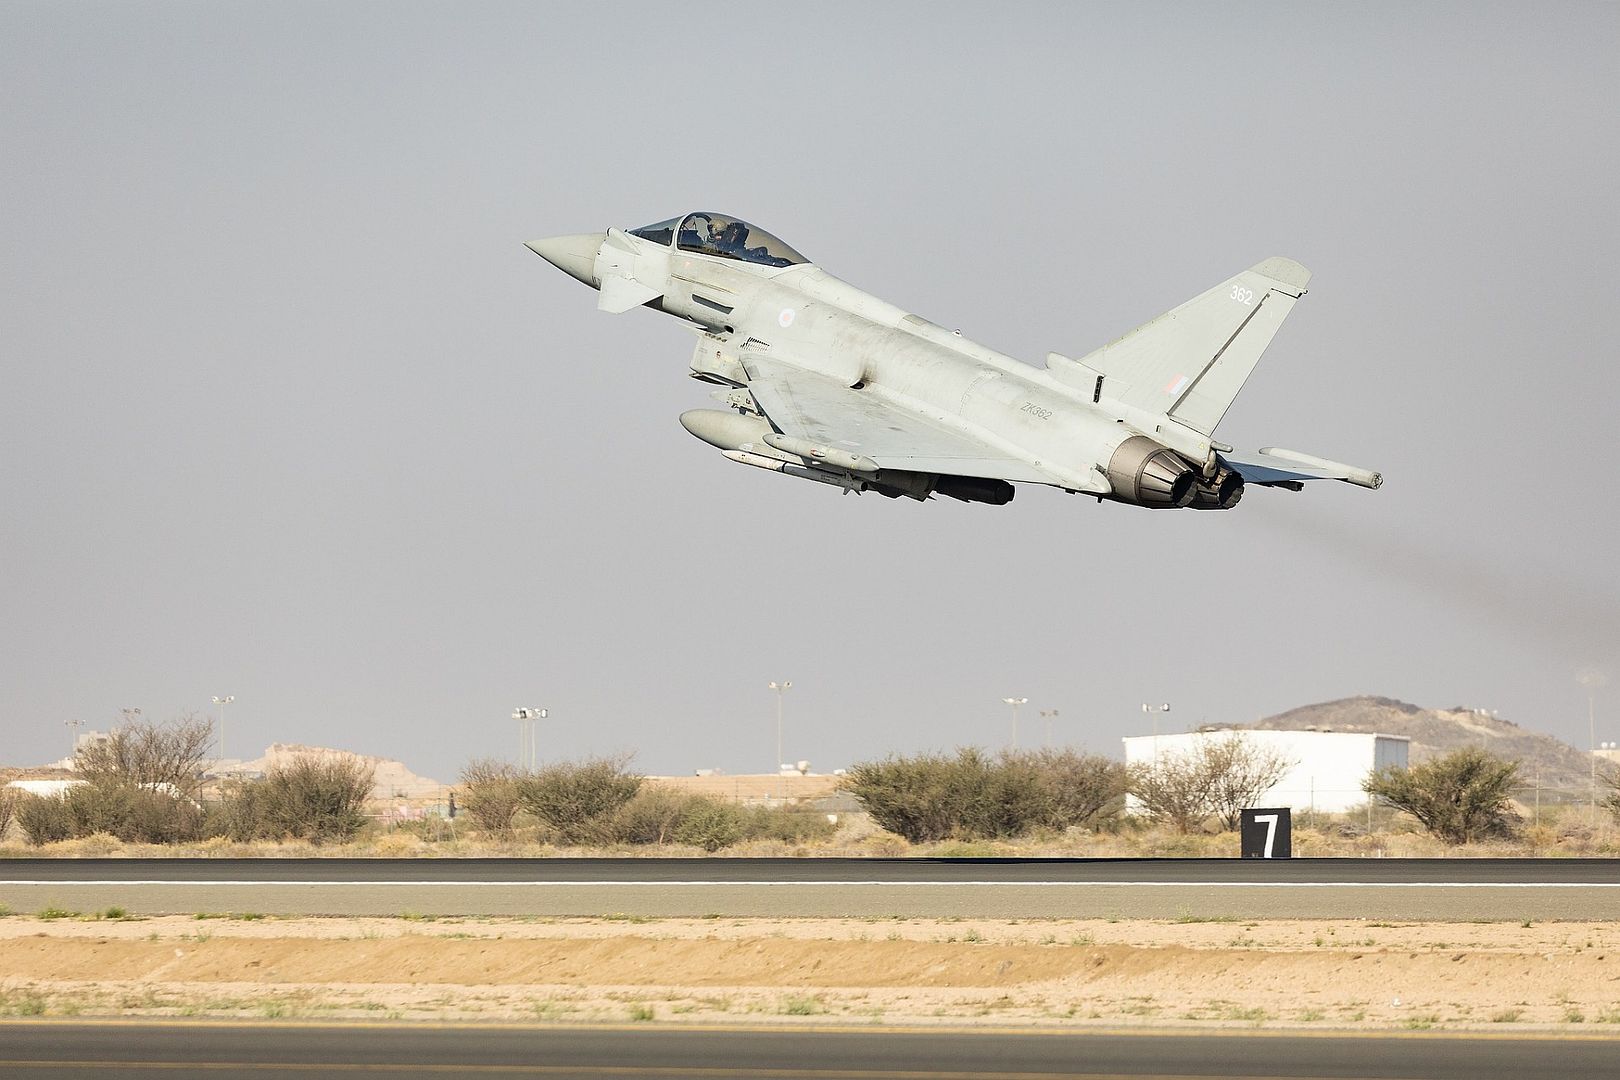 903 Expeditionary Air Wing Personnel Based At RAF Akrabiaotiri Deployed To The Kingdom Of Saudi Arabia